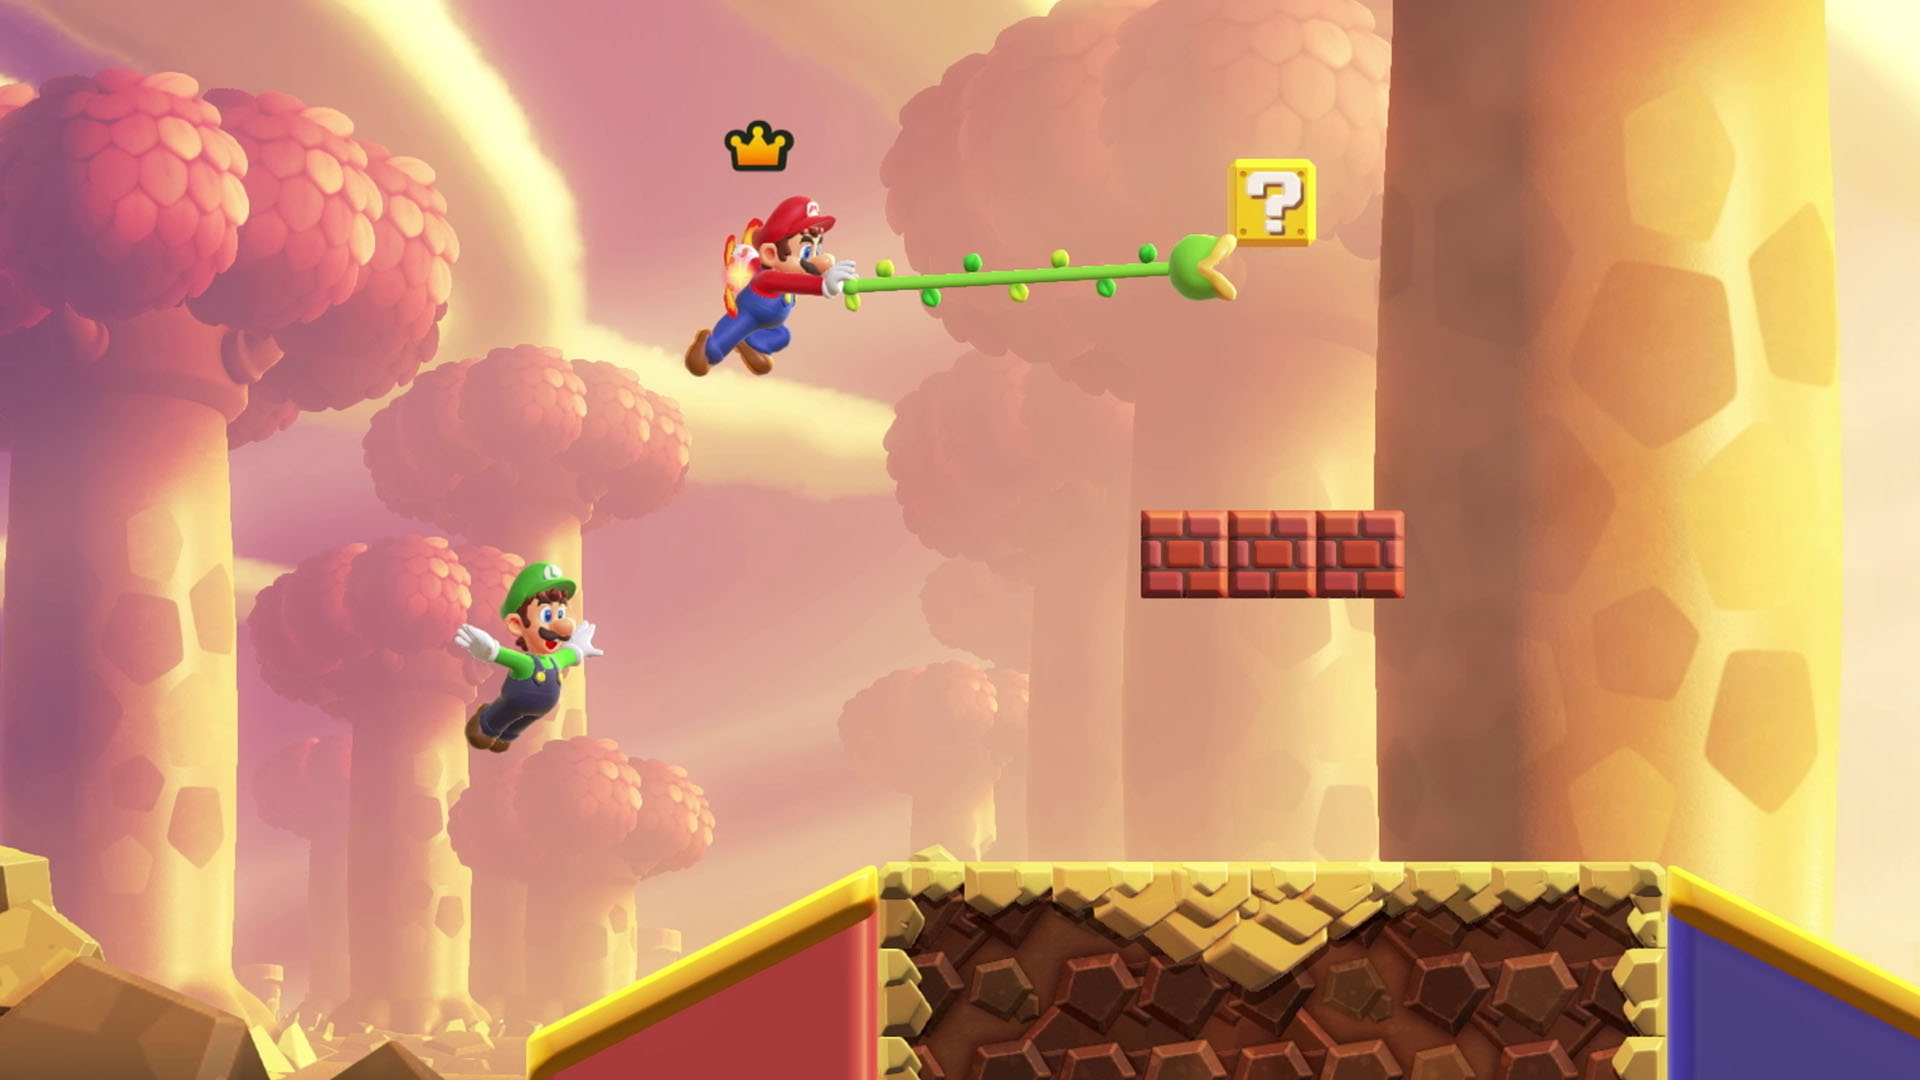 New Info. Suggests Online Multiplayer Mode For Super Mario Bros. Wonder 